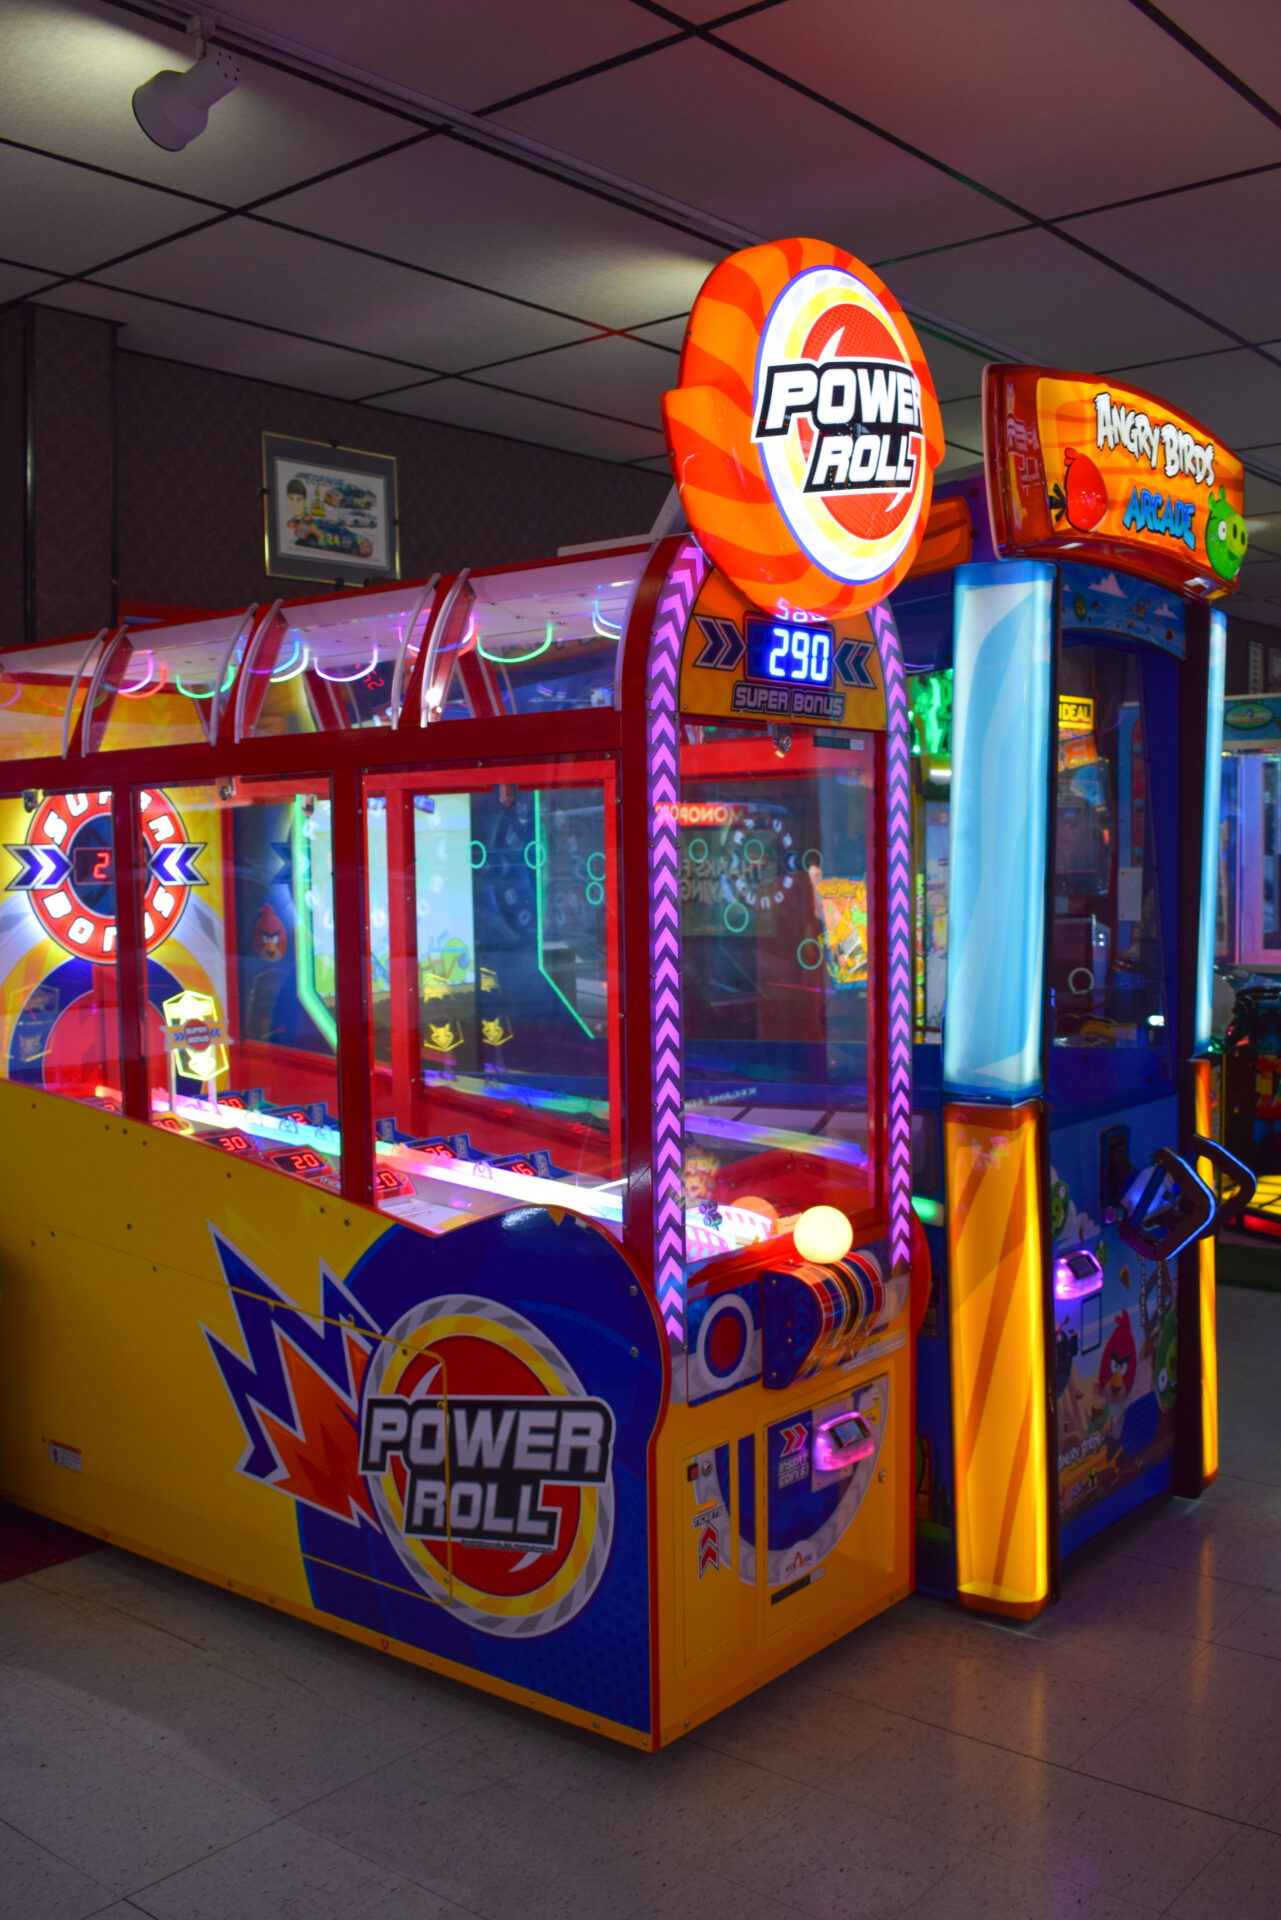 Game station of Power Roll & Angry Birds Arcade